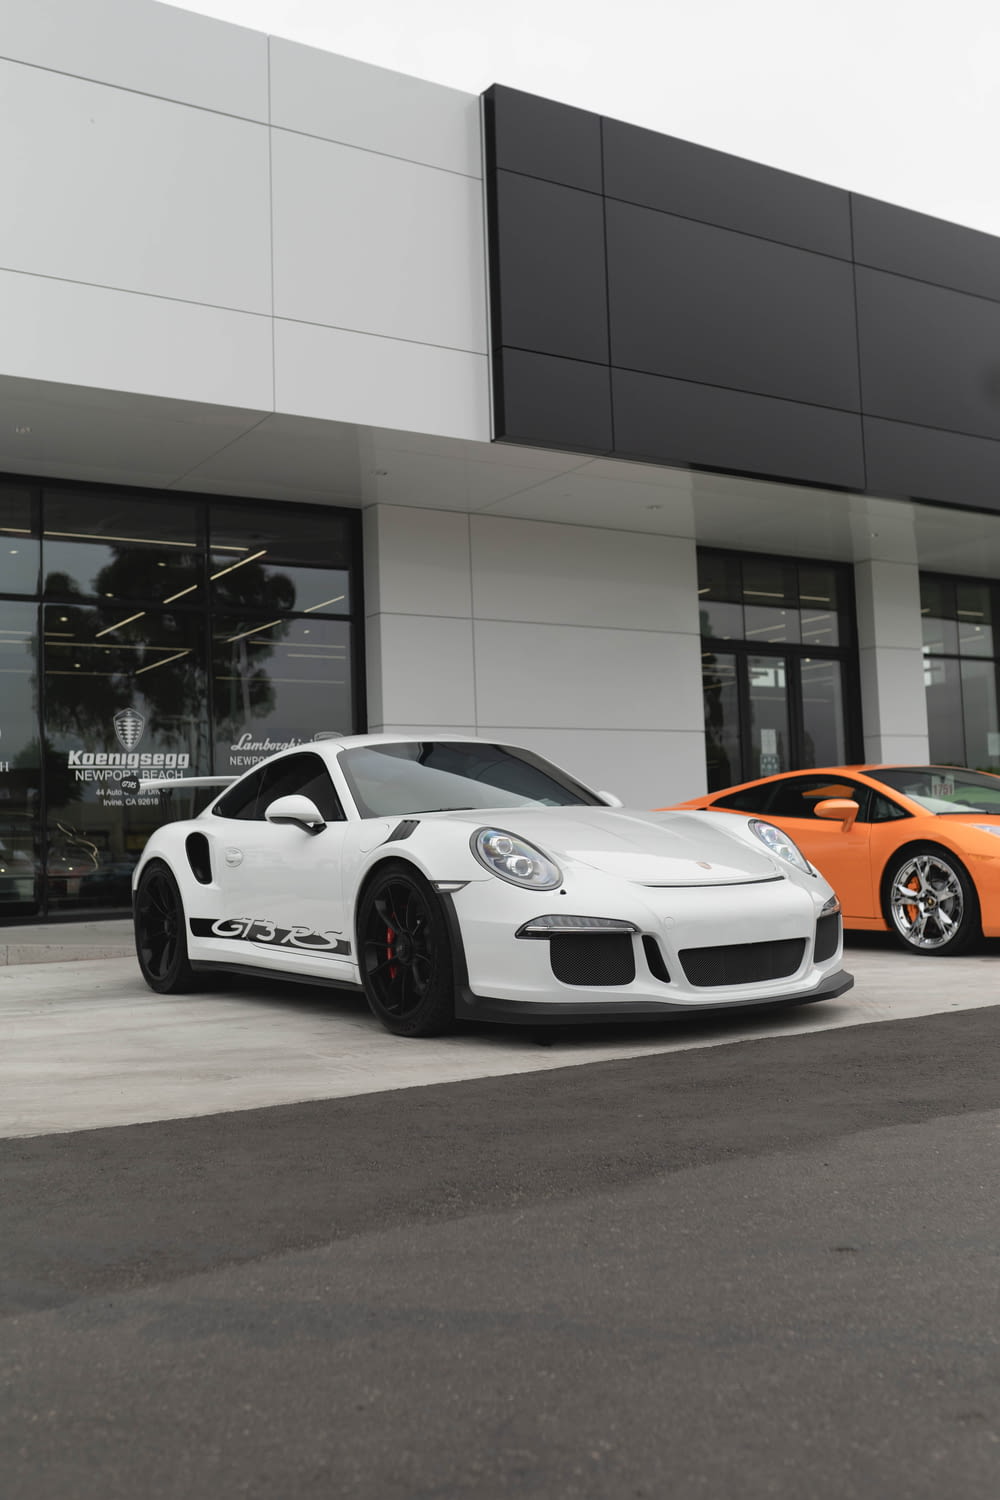 white and orange porsche 911 parked in front of white building